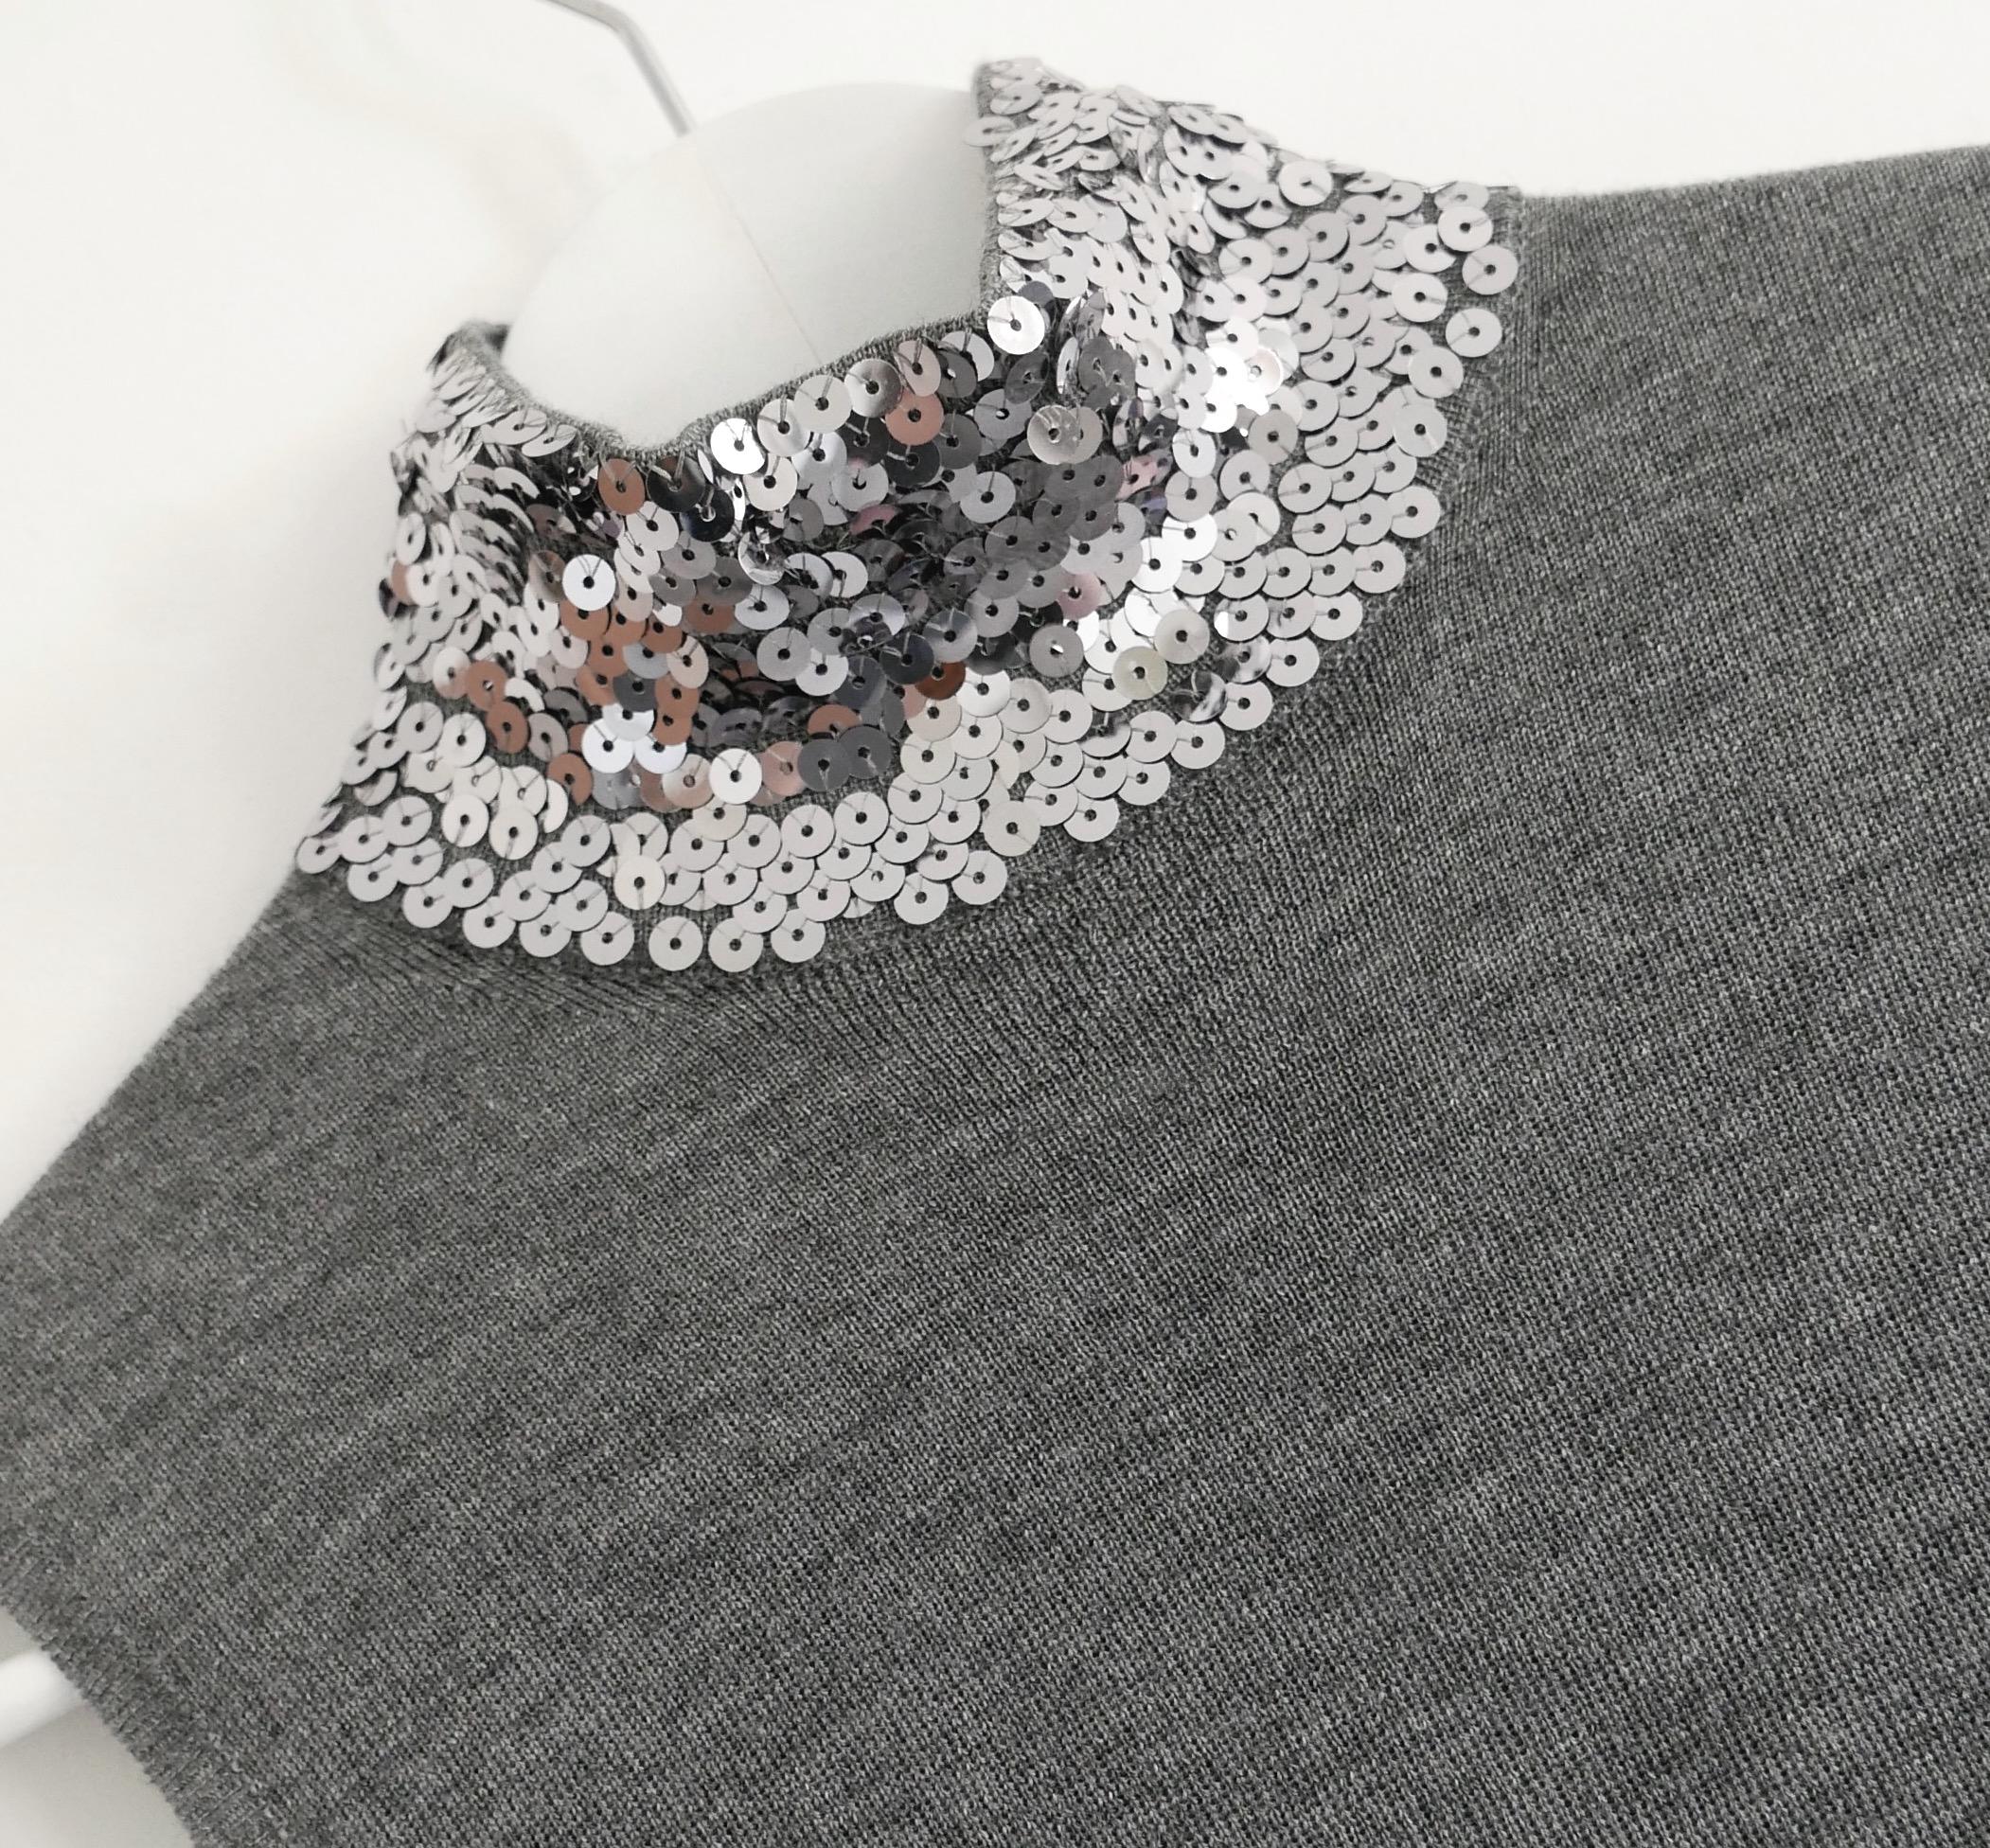 Absolutely stunning Dior sequin embellished sleeveless sweater from the Pre-Fall 2015 Collection. Bought for £1500 and unworn. 
Made from fine, super soft grey wool and silk mix with high neck covered in sparkling silver sequins. Has a gently